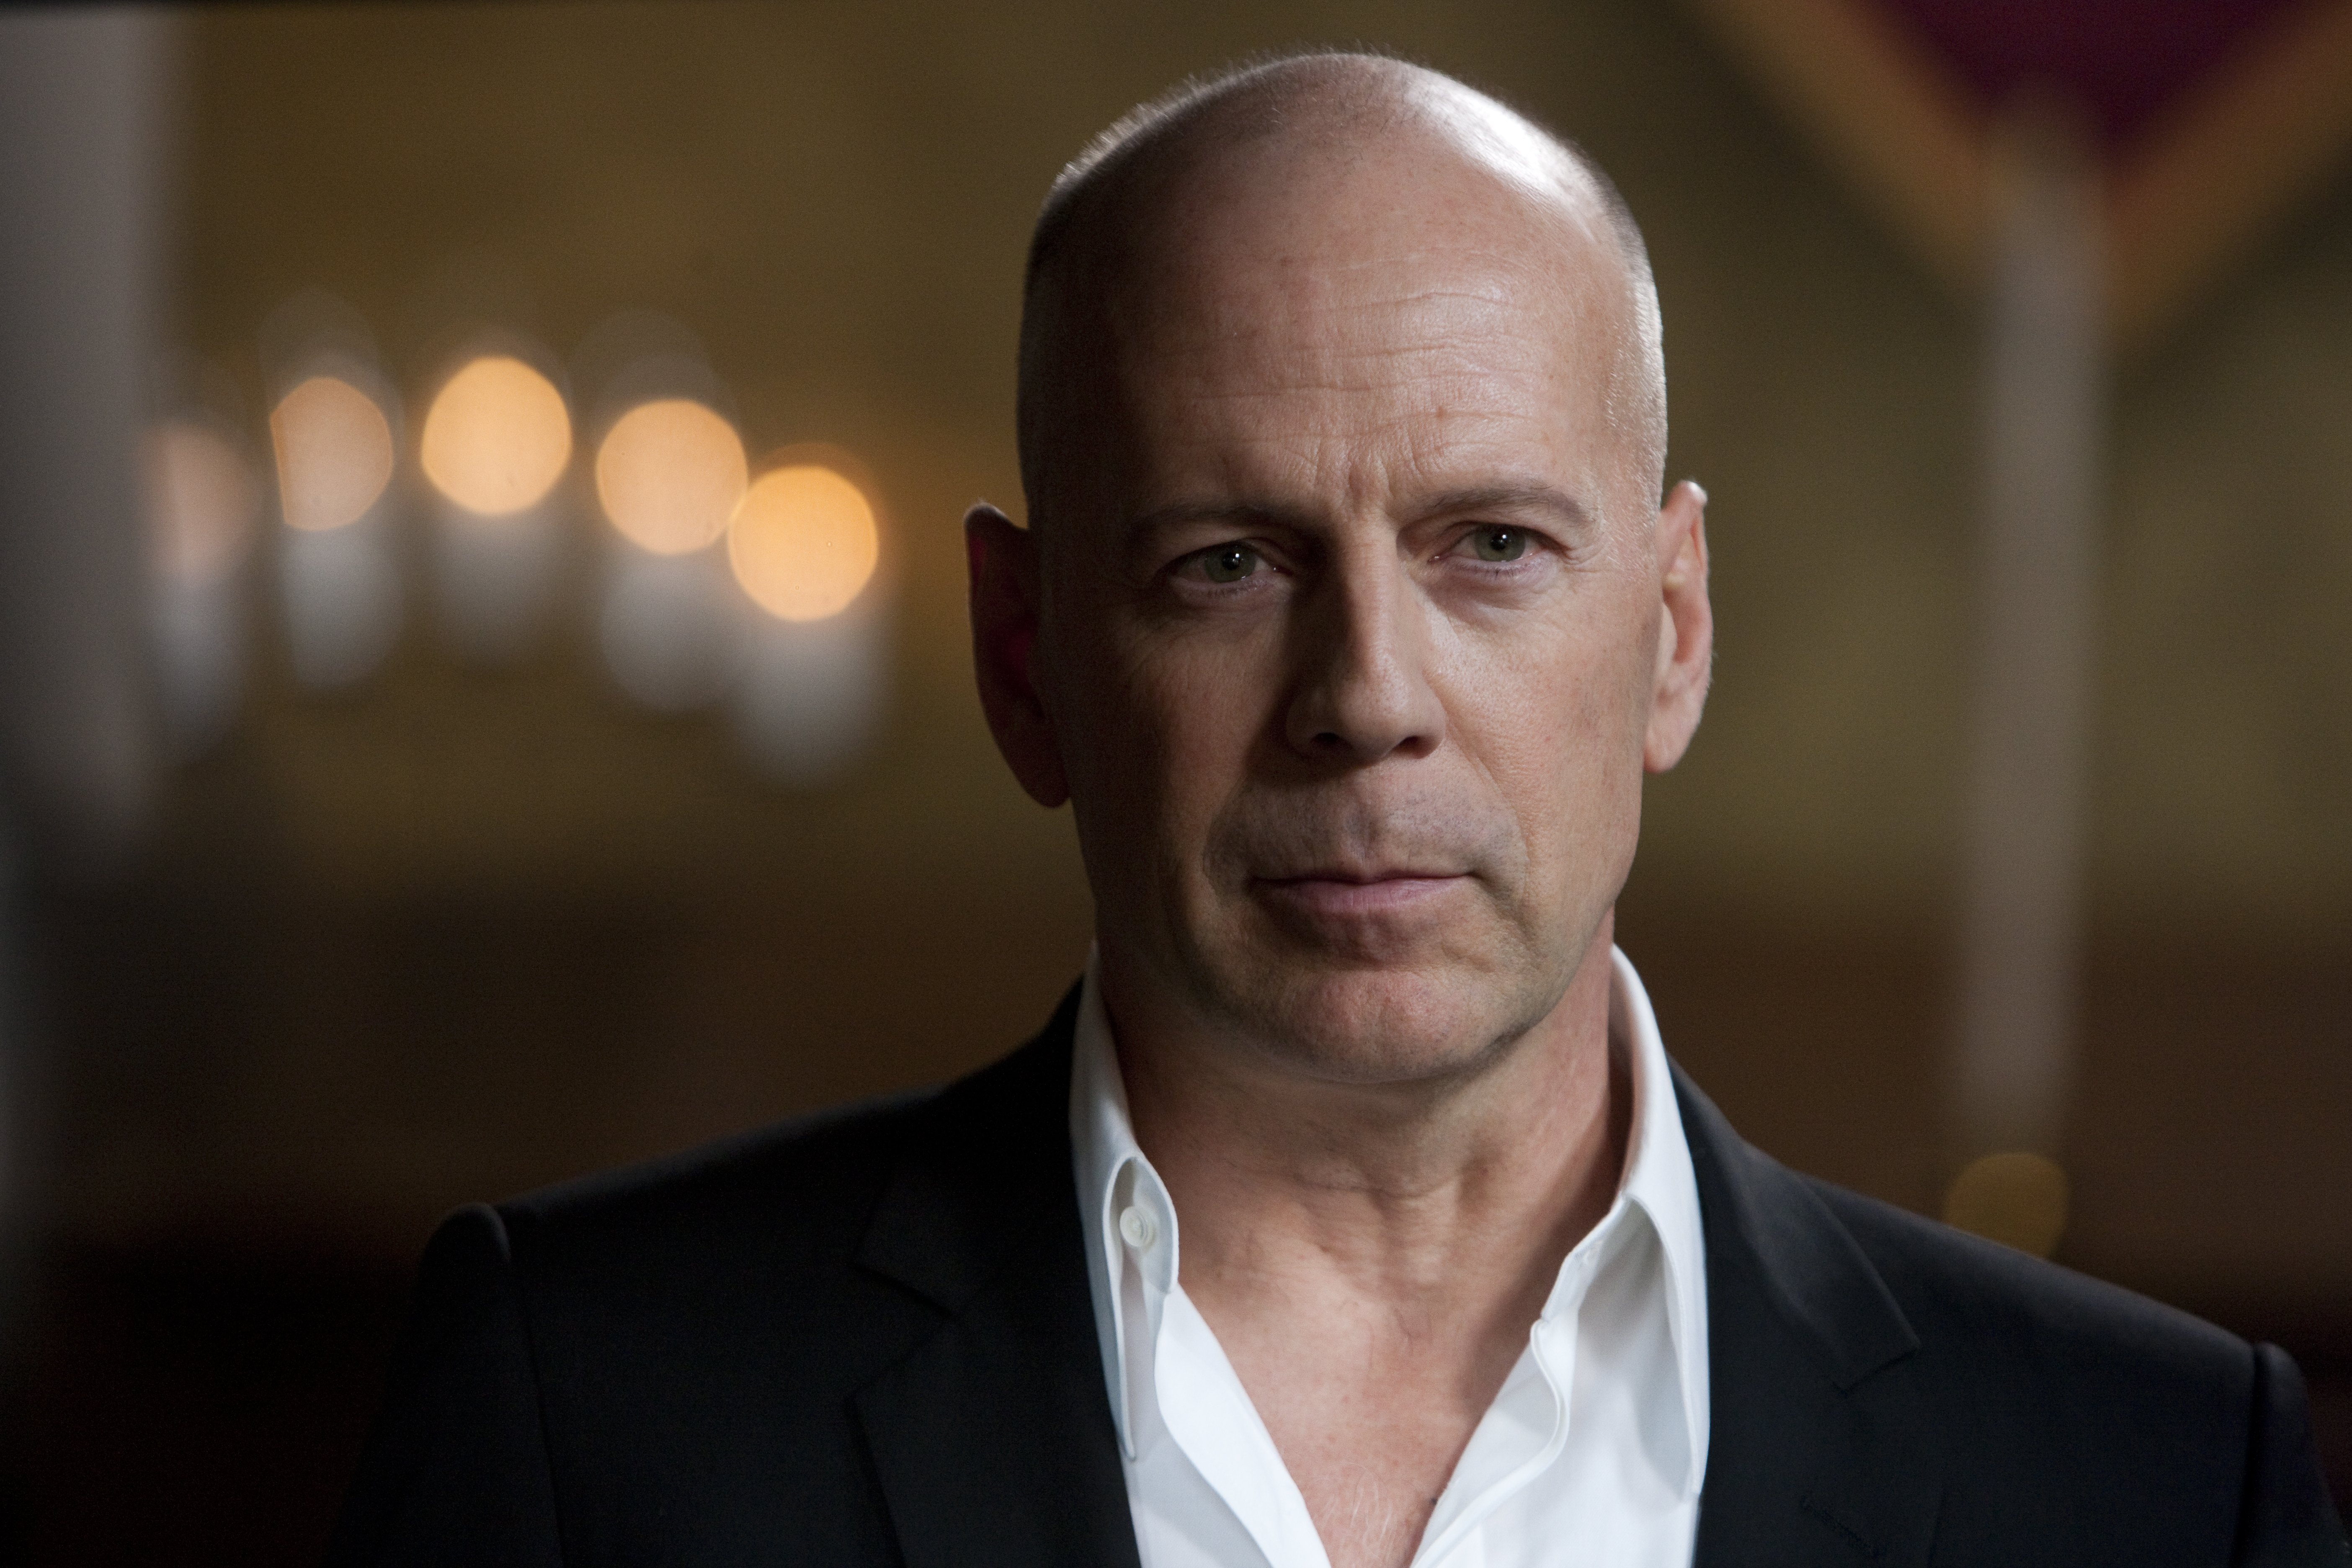 Bruce Willis Church The Expendables The Expendables 5616x3744